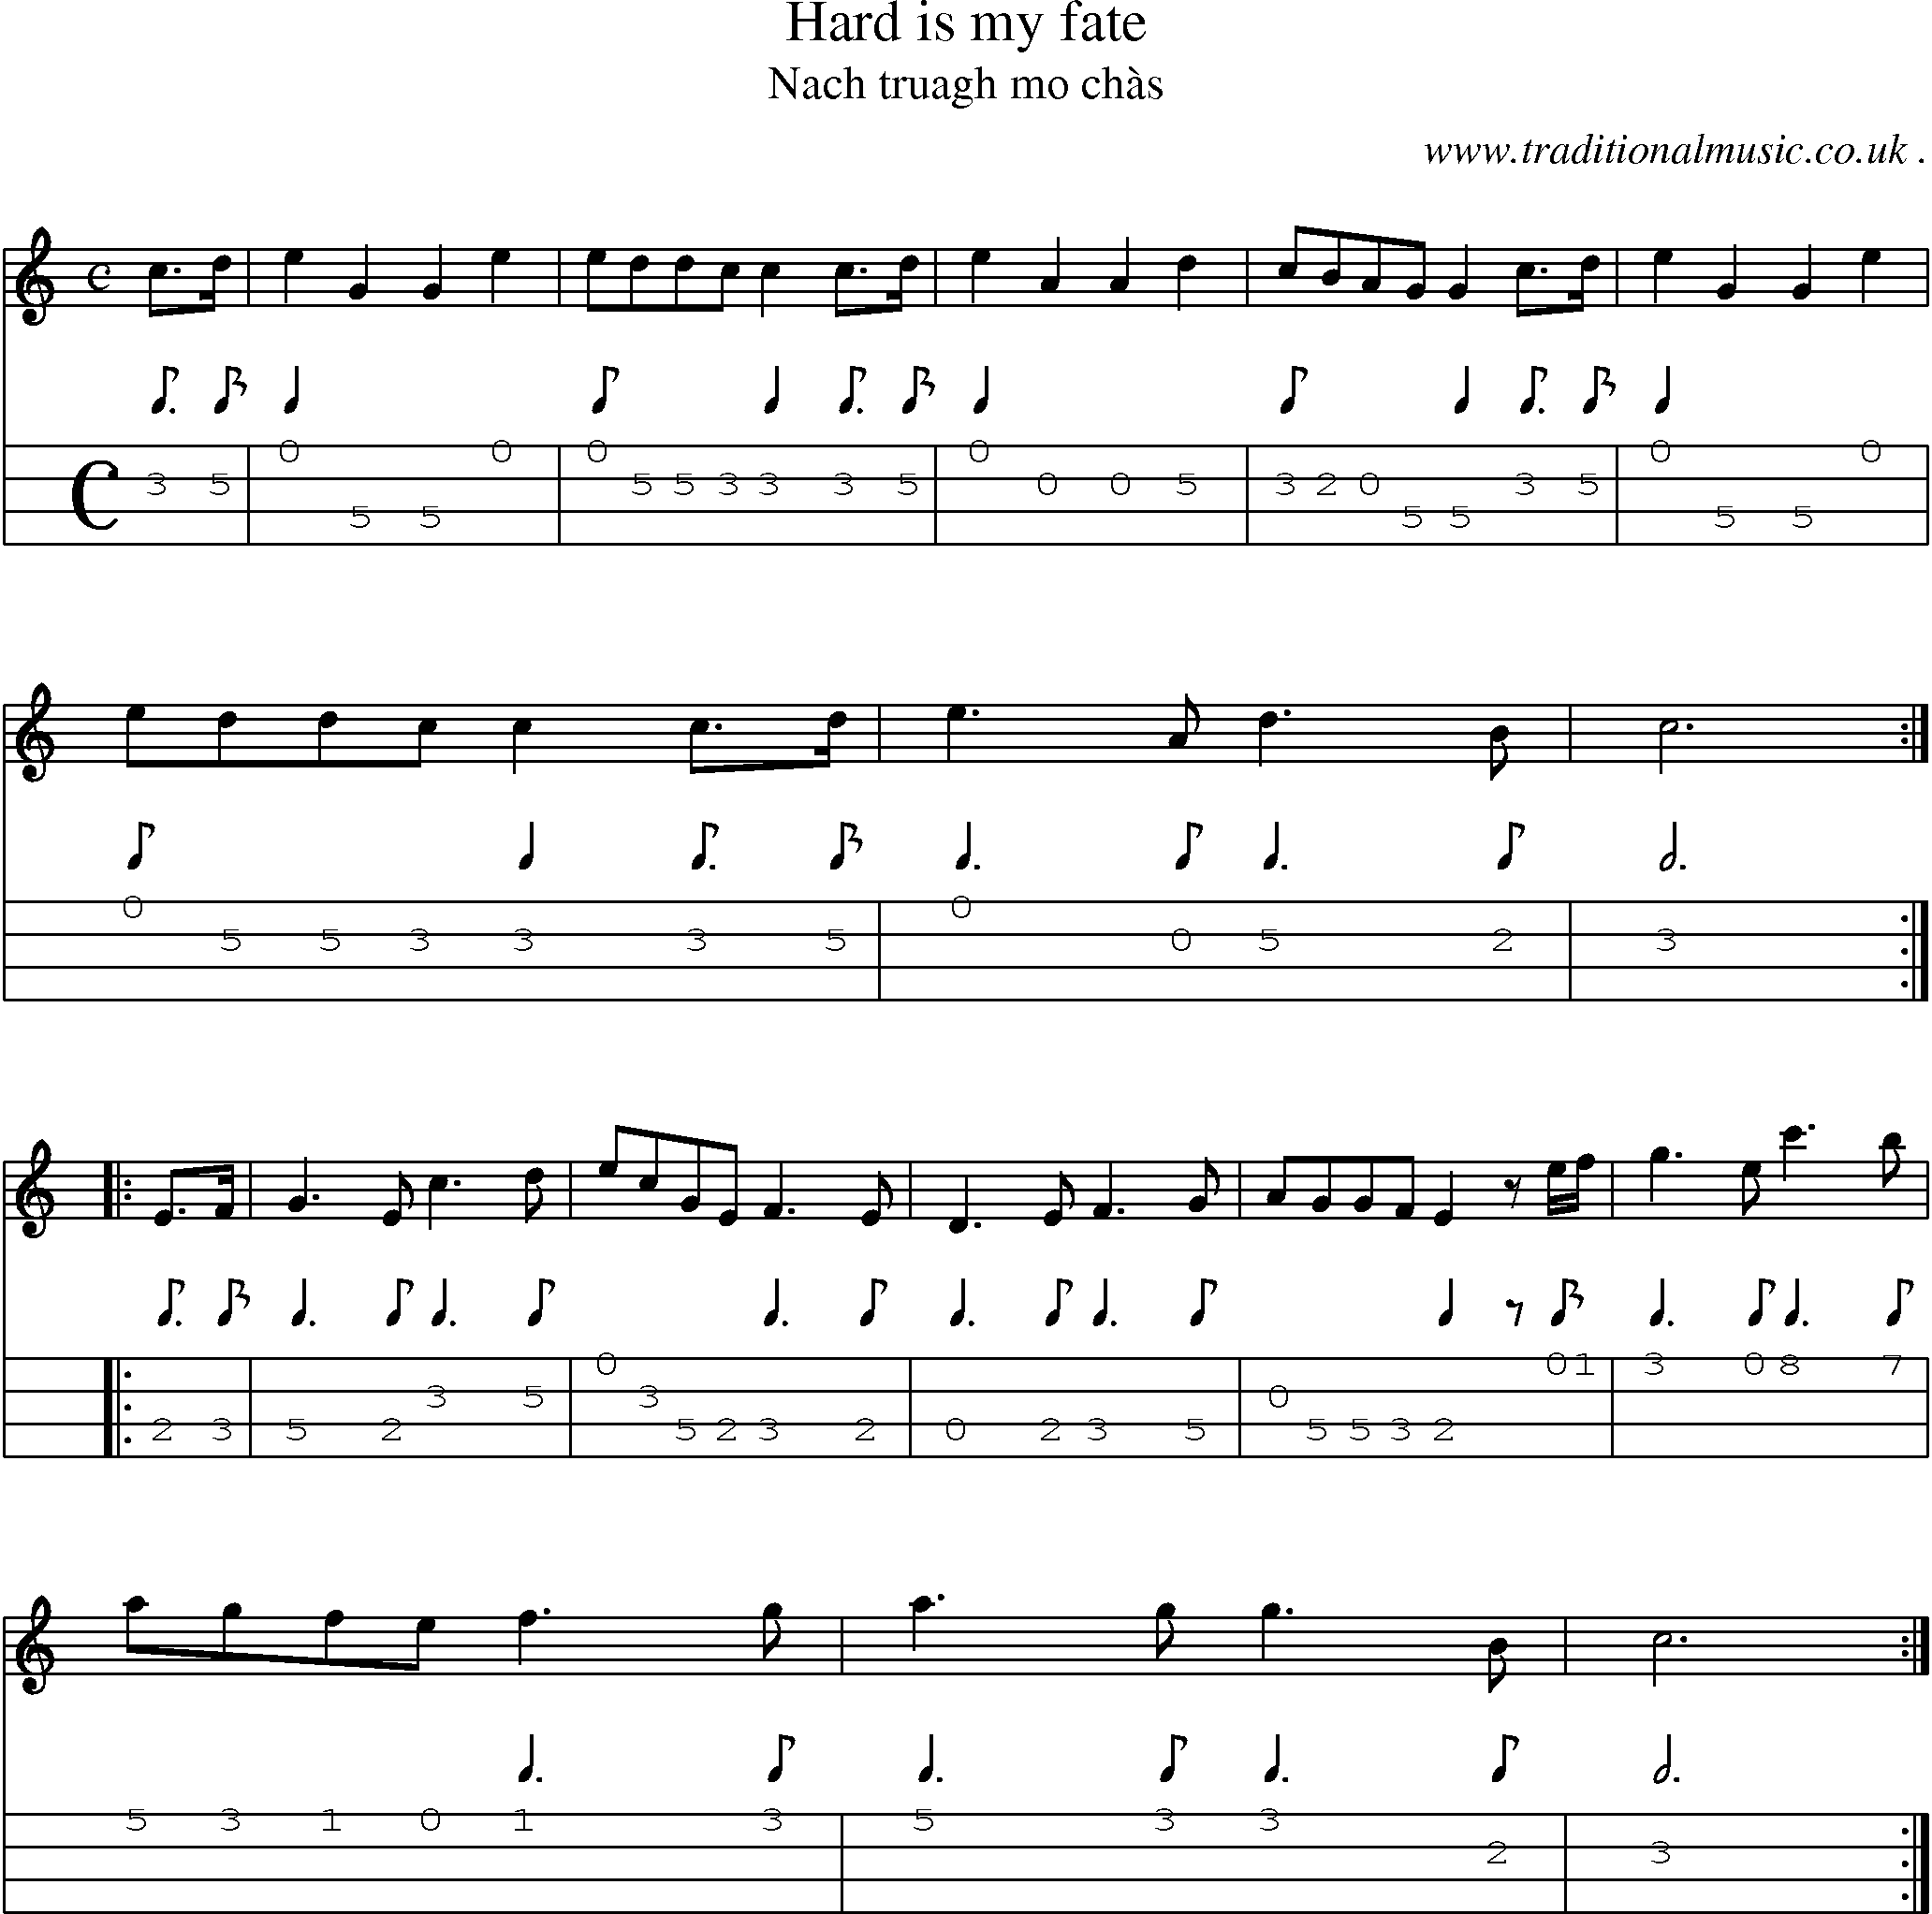 Sheet-music  score, Chords and Mandolin Tabs for Hard Is My Fate